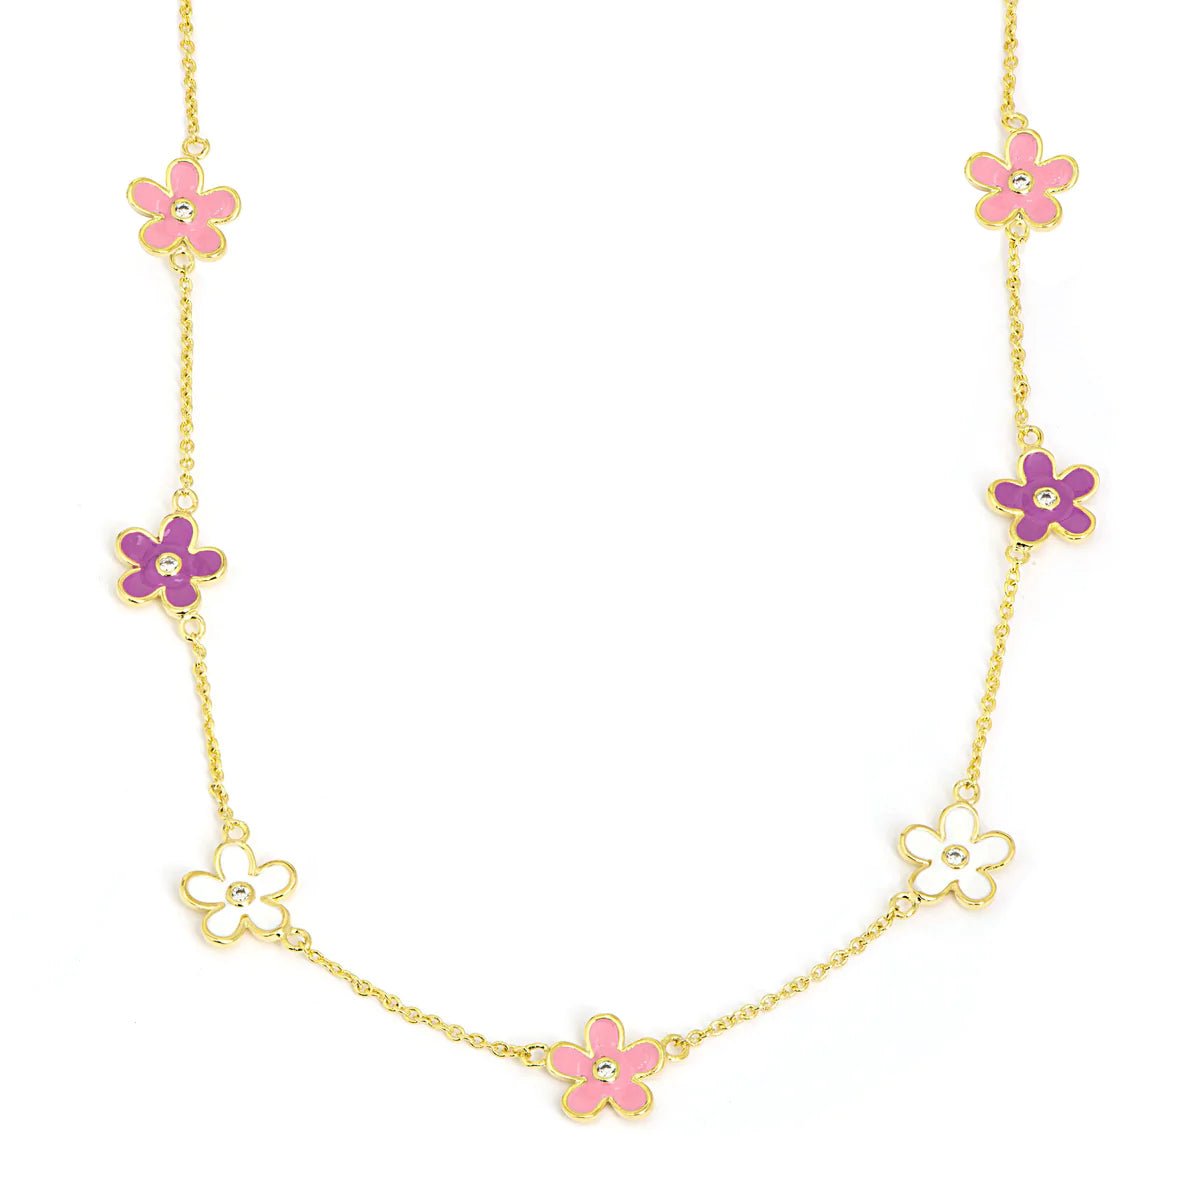 station necklace - hearts or flower